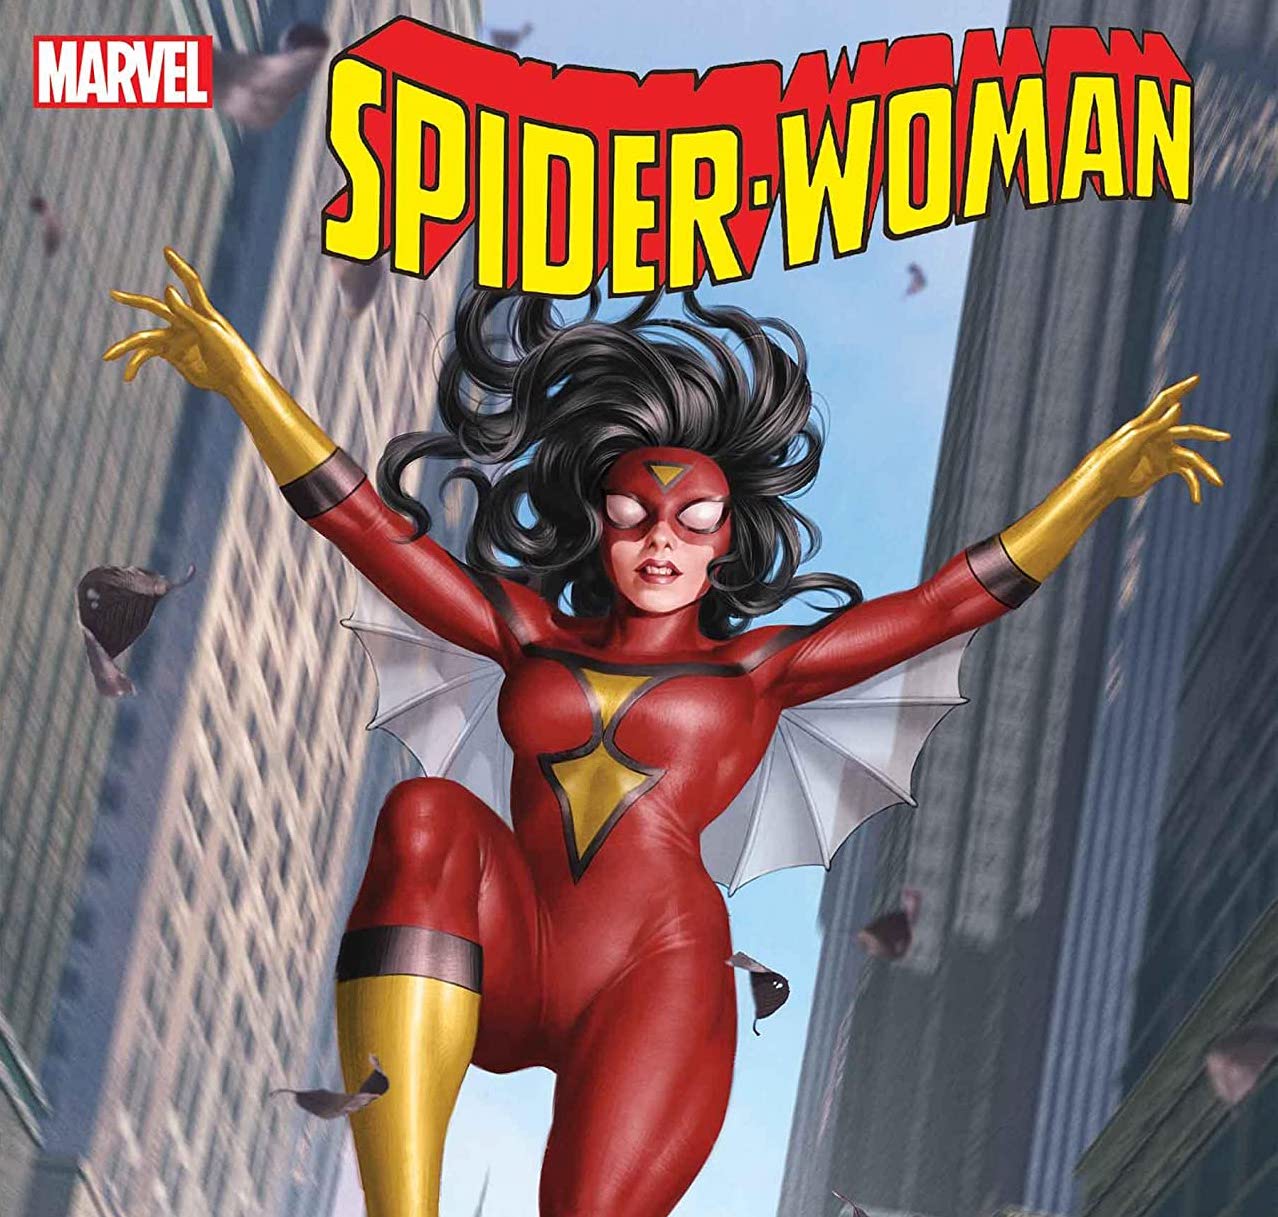 'Spider-Woman' #11 is the definition of high-energy action comics